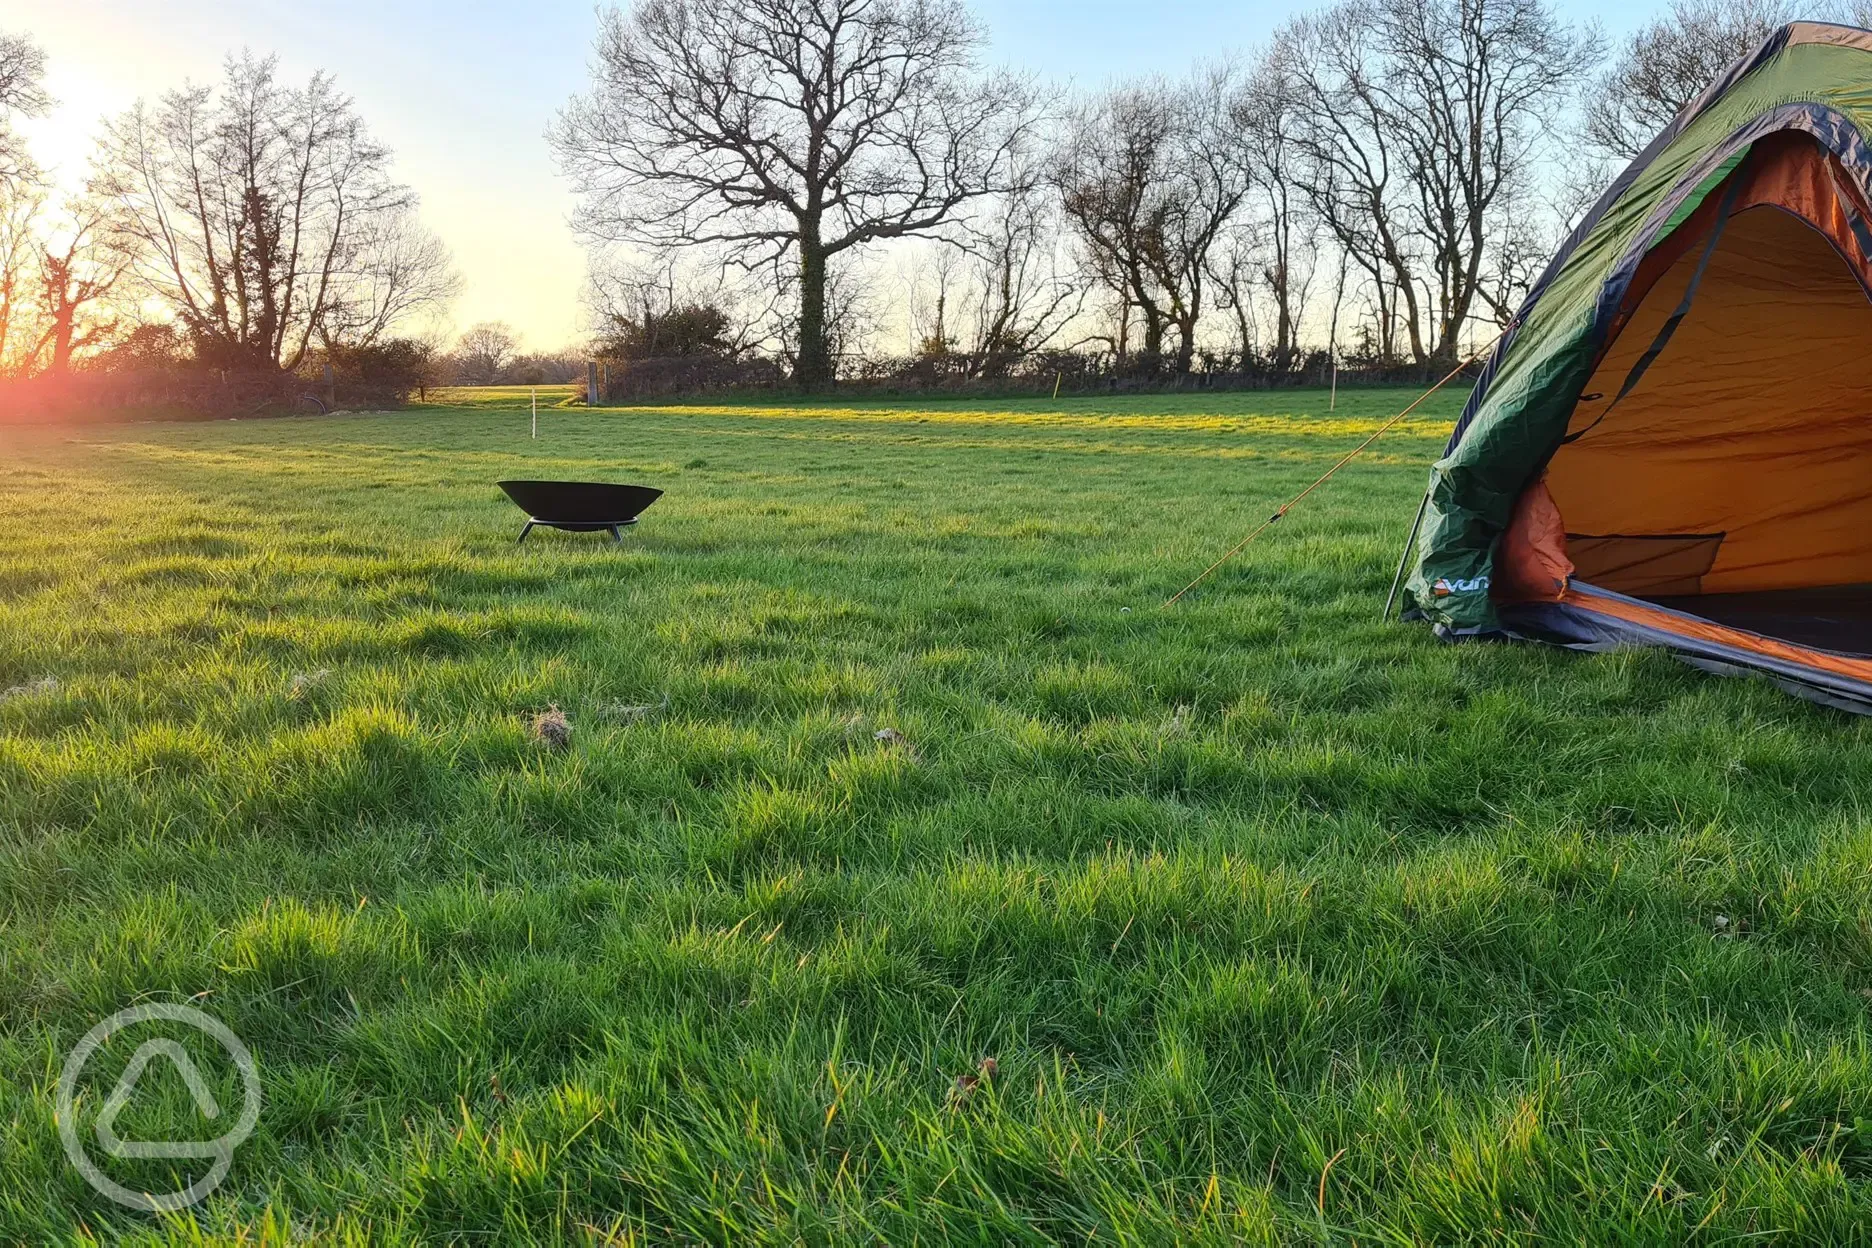 Grass tent pitches at sunset